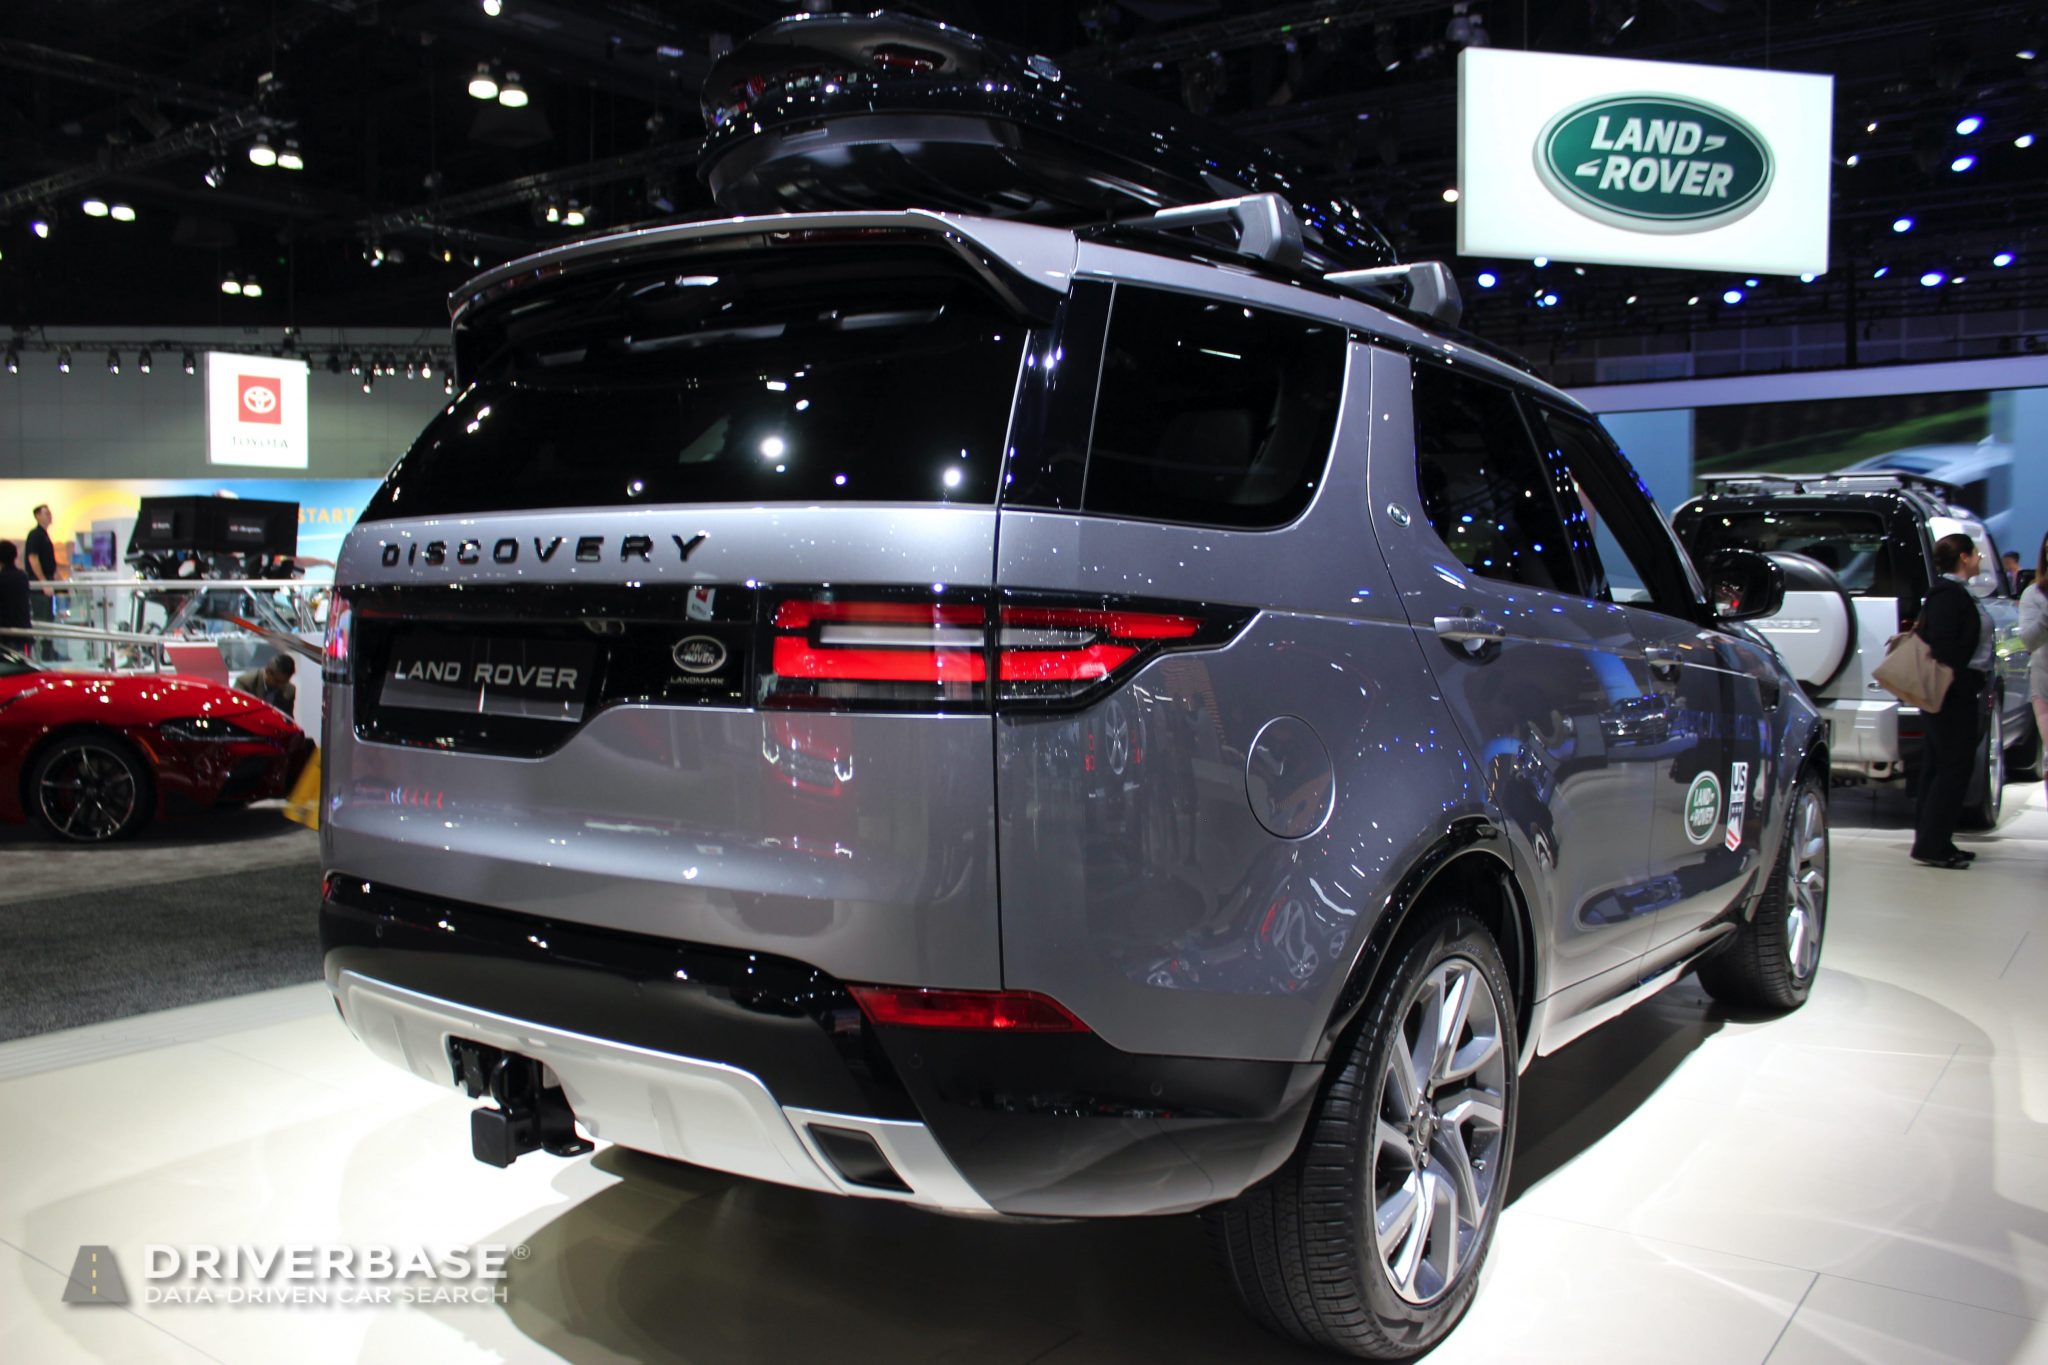 2020 Land Rover Discovery at the 2019 Los Angeles Auto Show